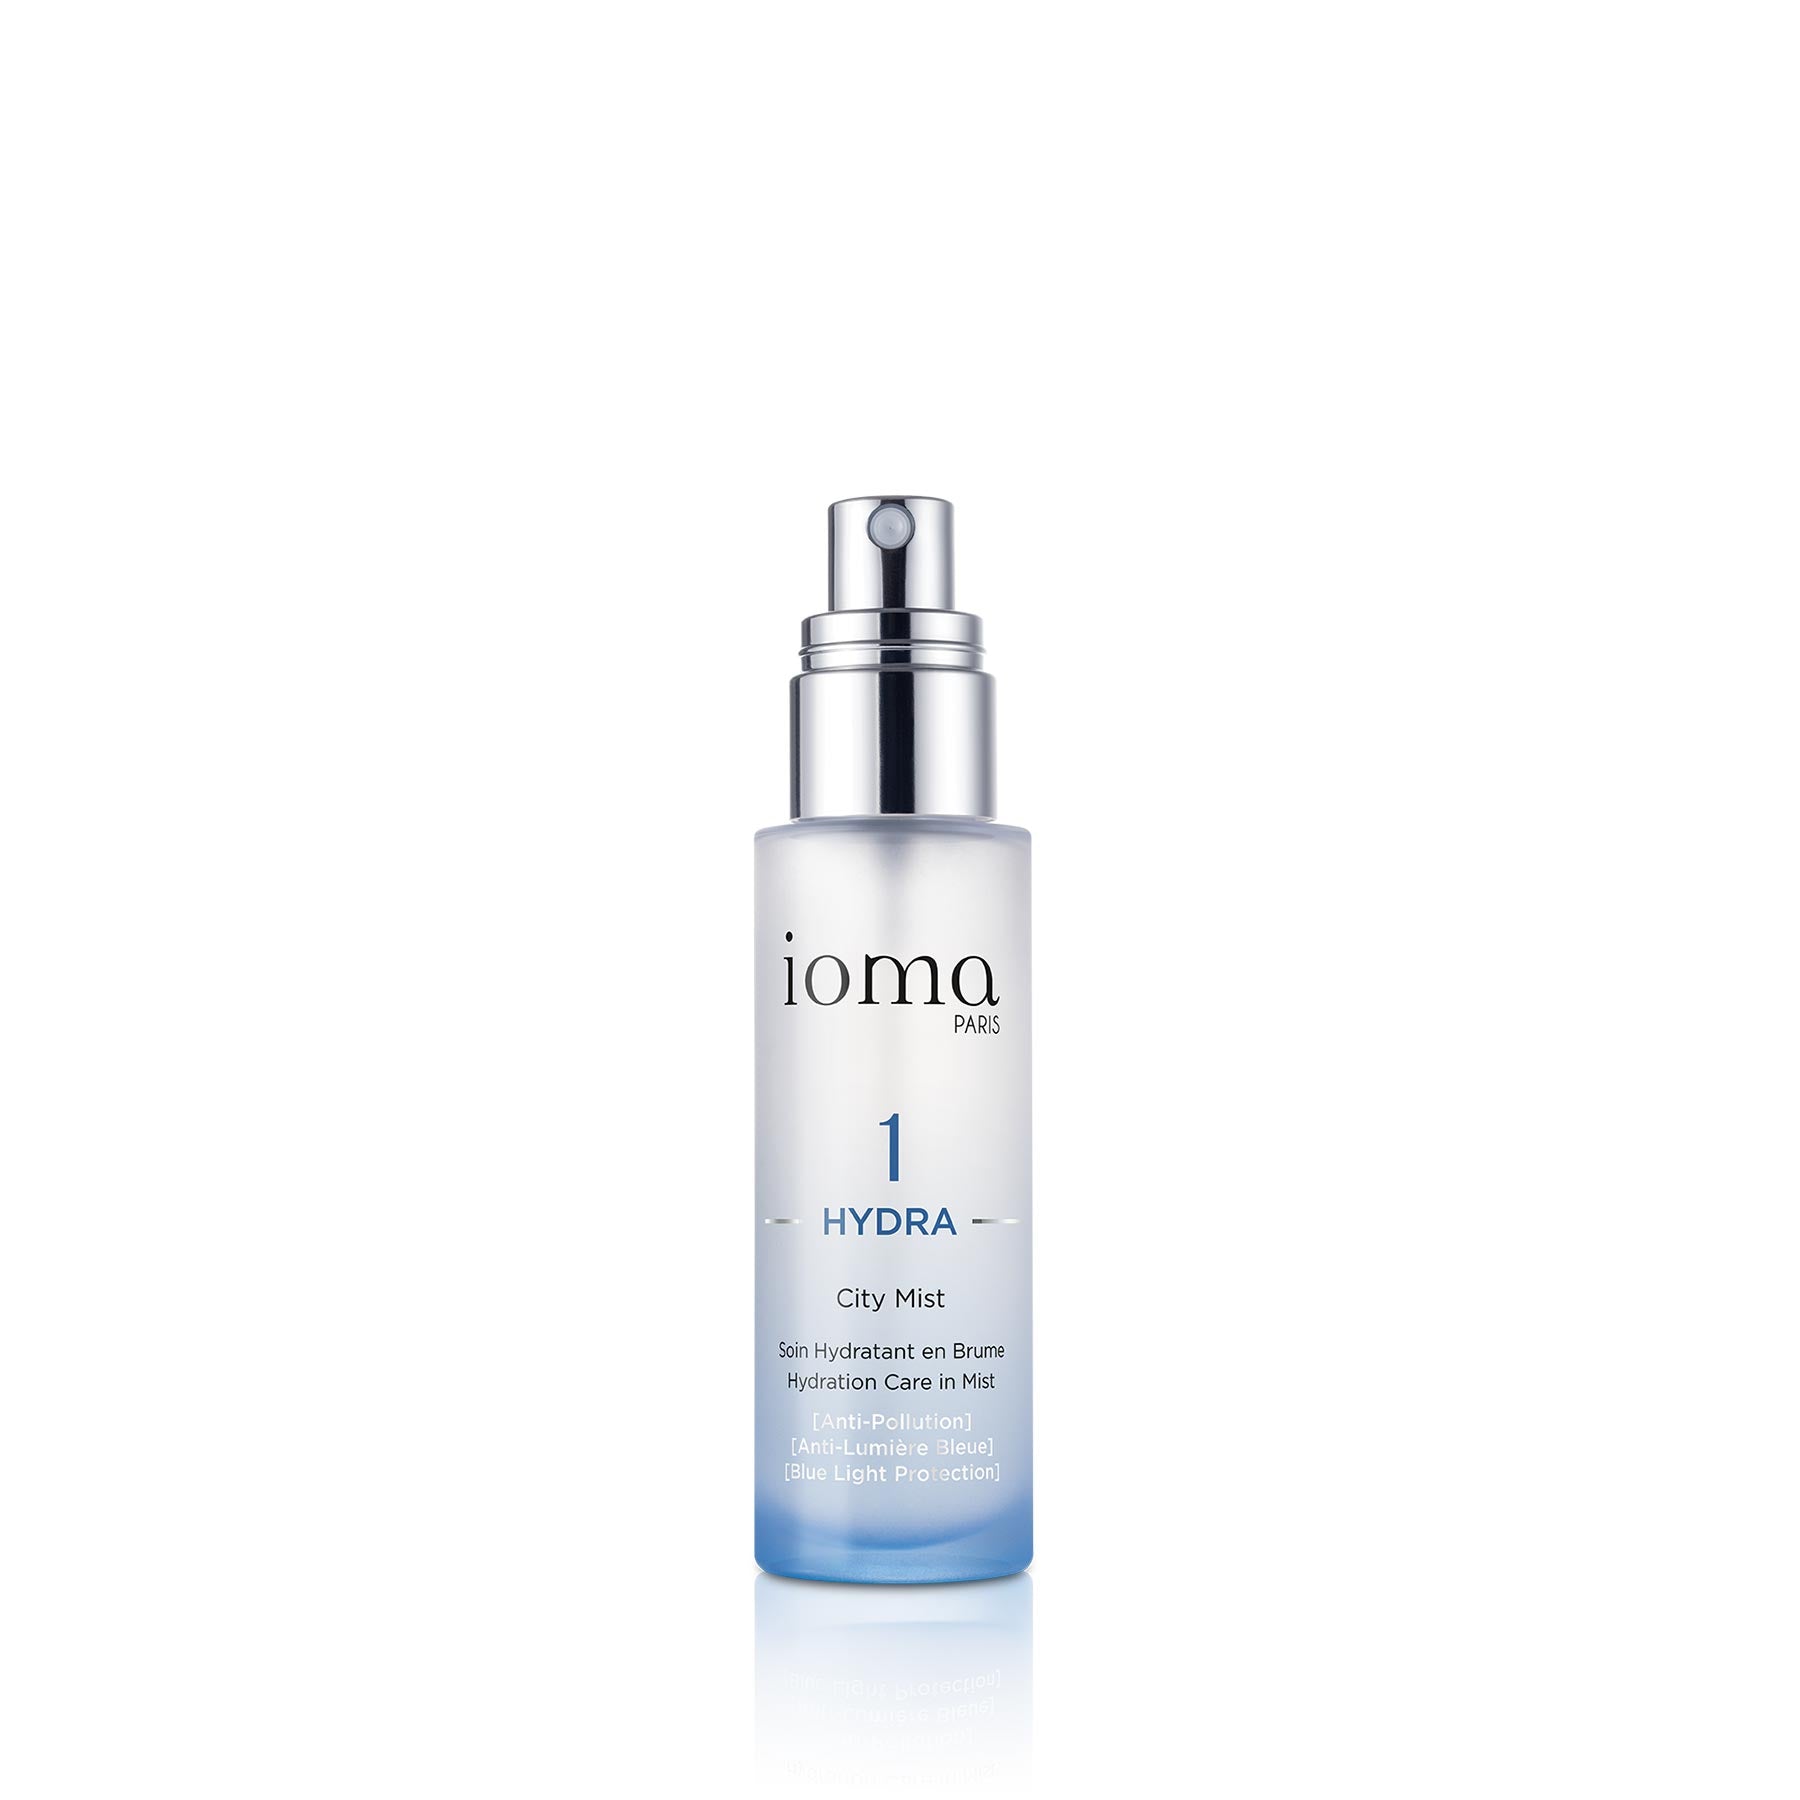 City Mist - 50ml - Moisturizing and protective mist for your face.